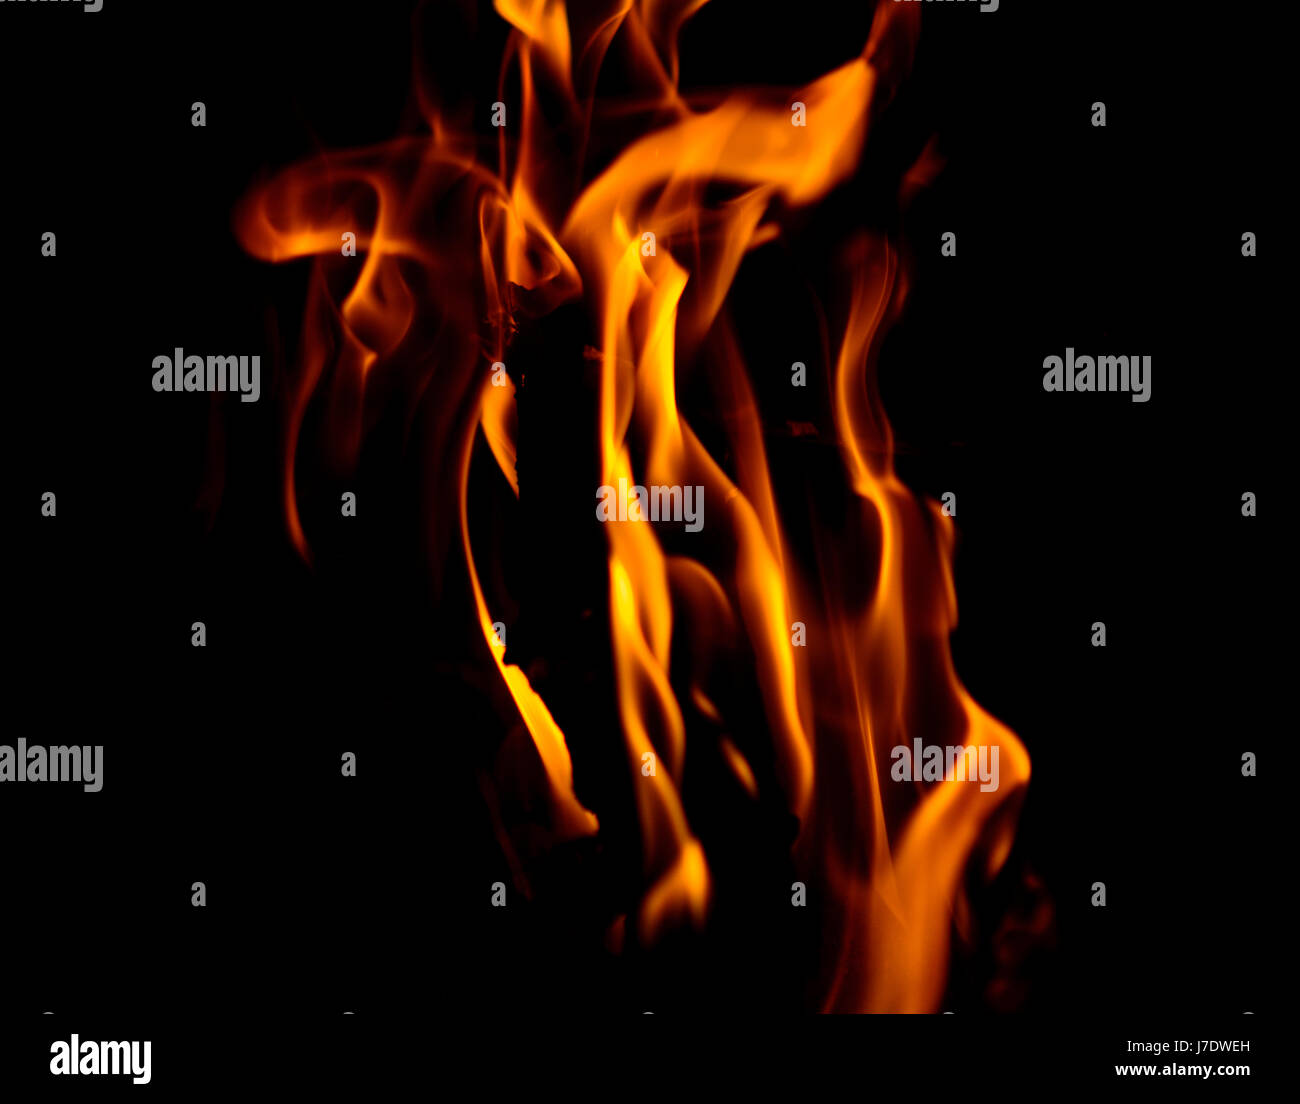 Fire Flame on Black Background Stock Photo